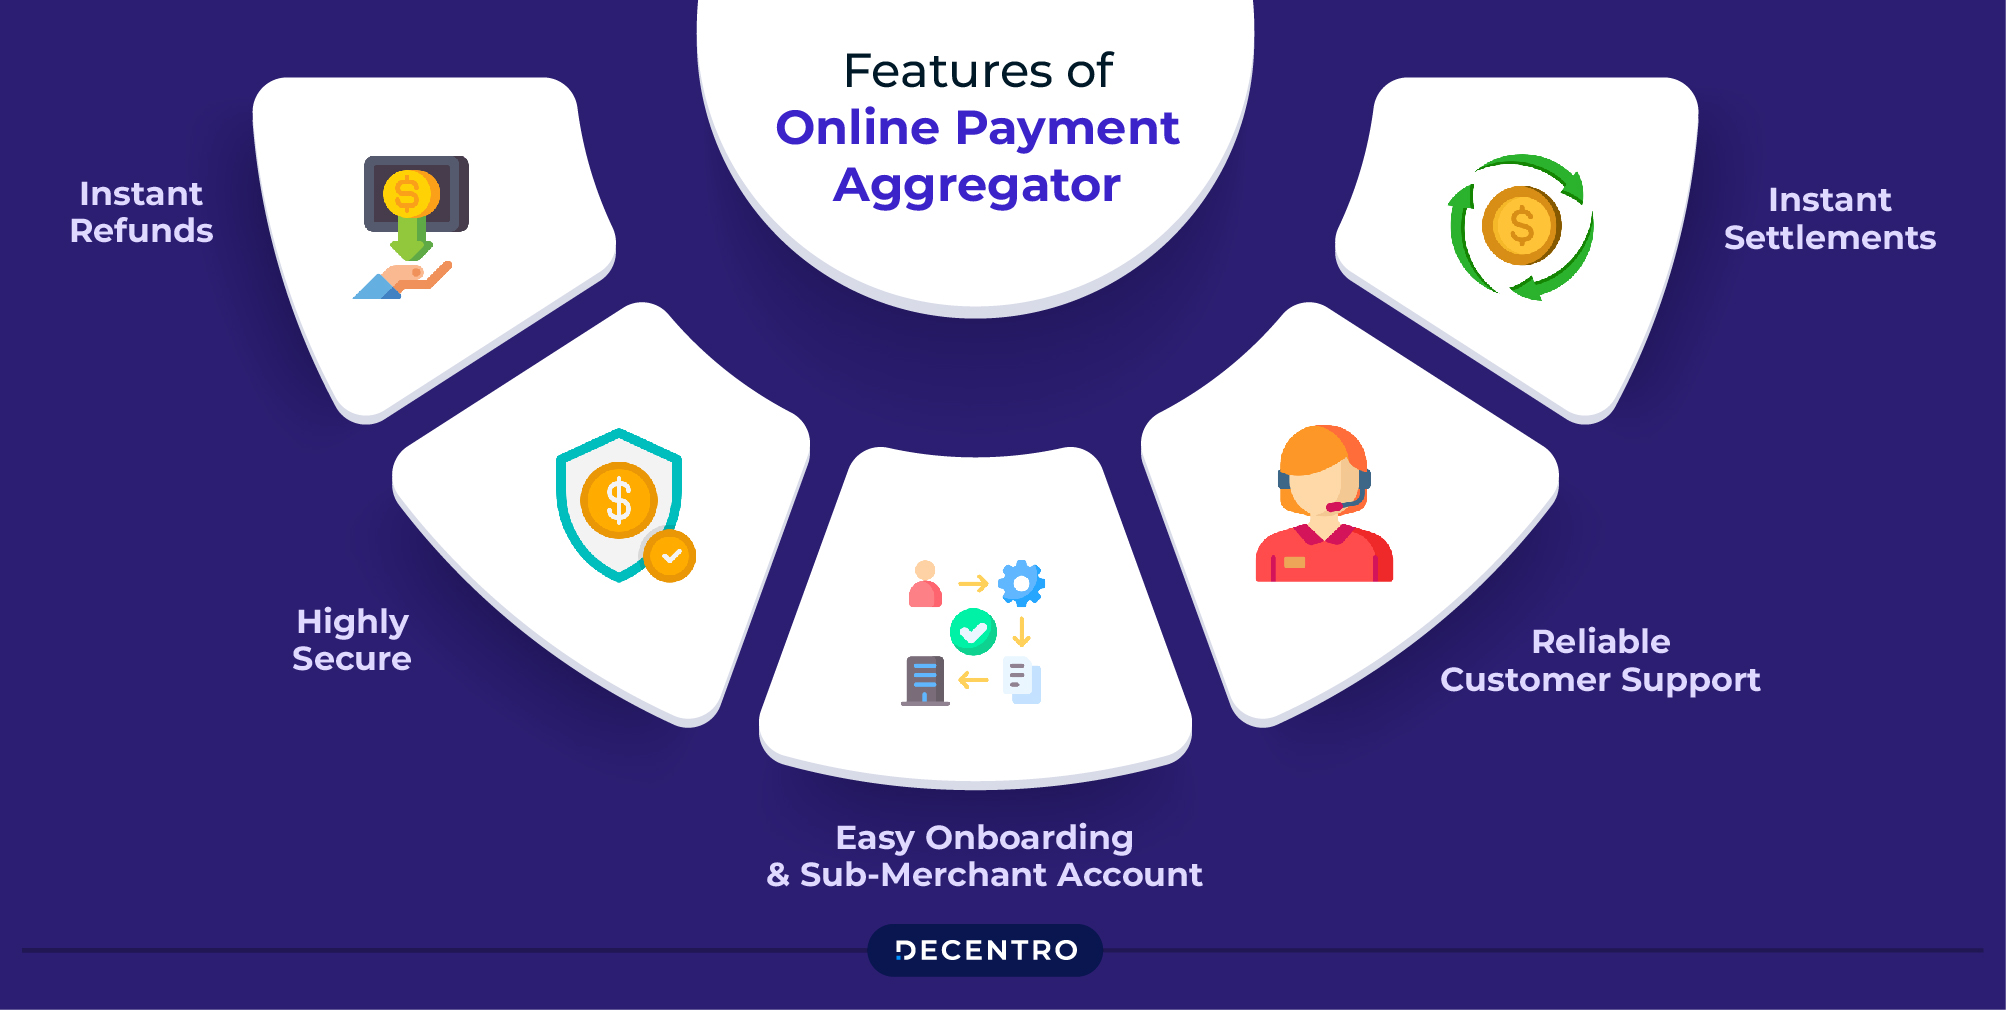 Features of Online Payment Aggregator 